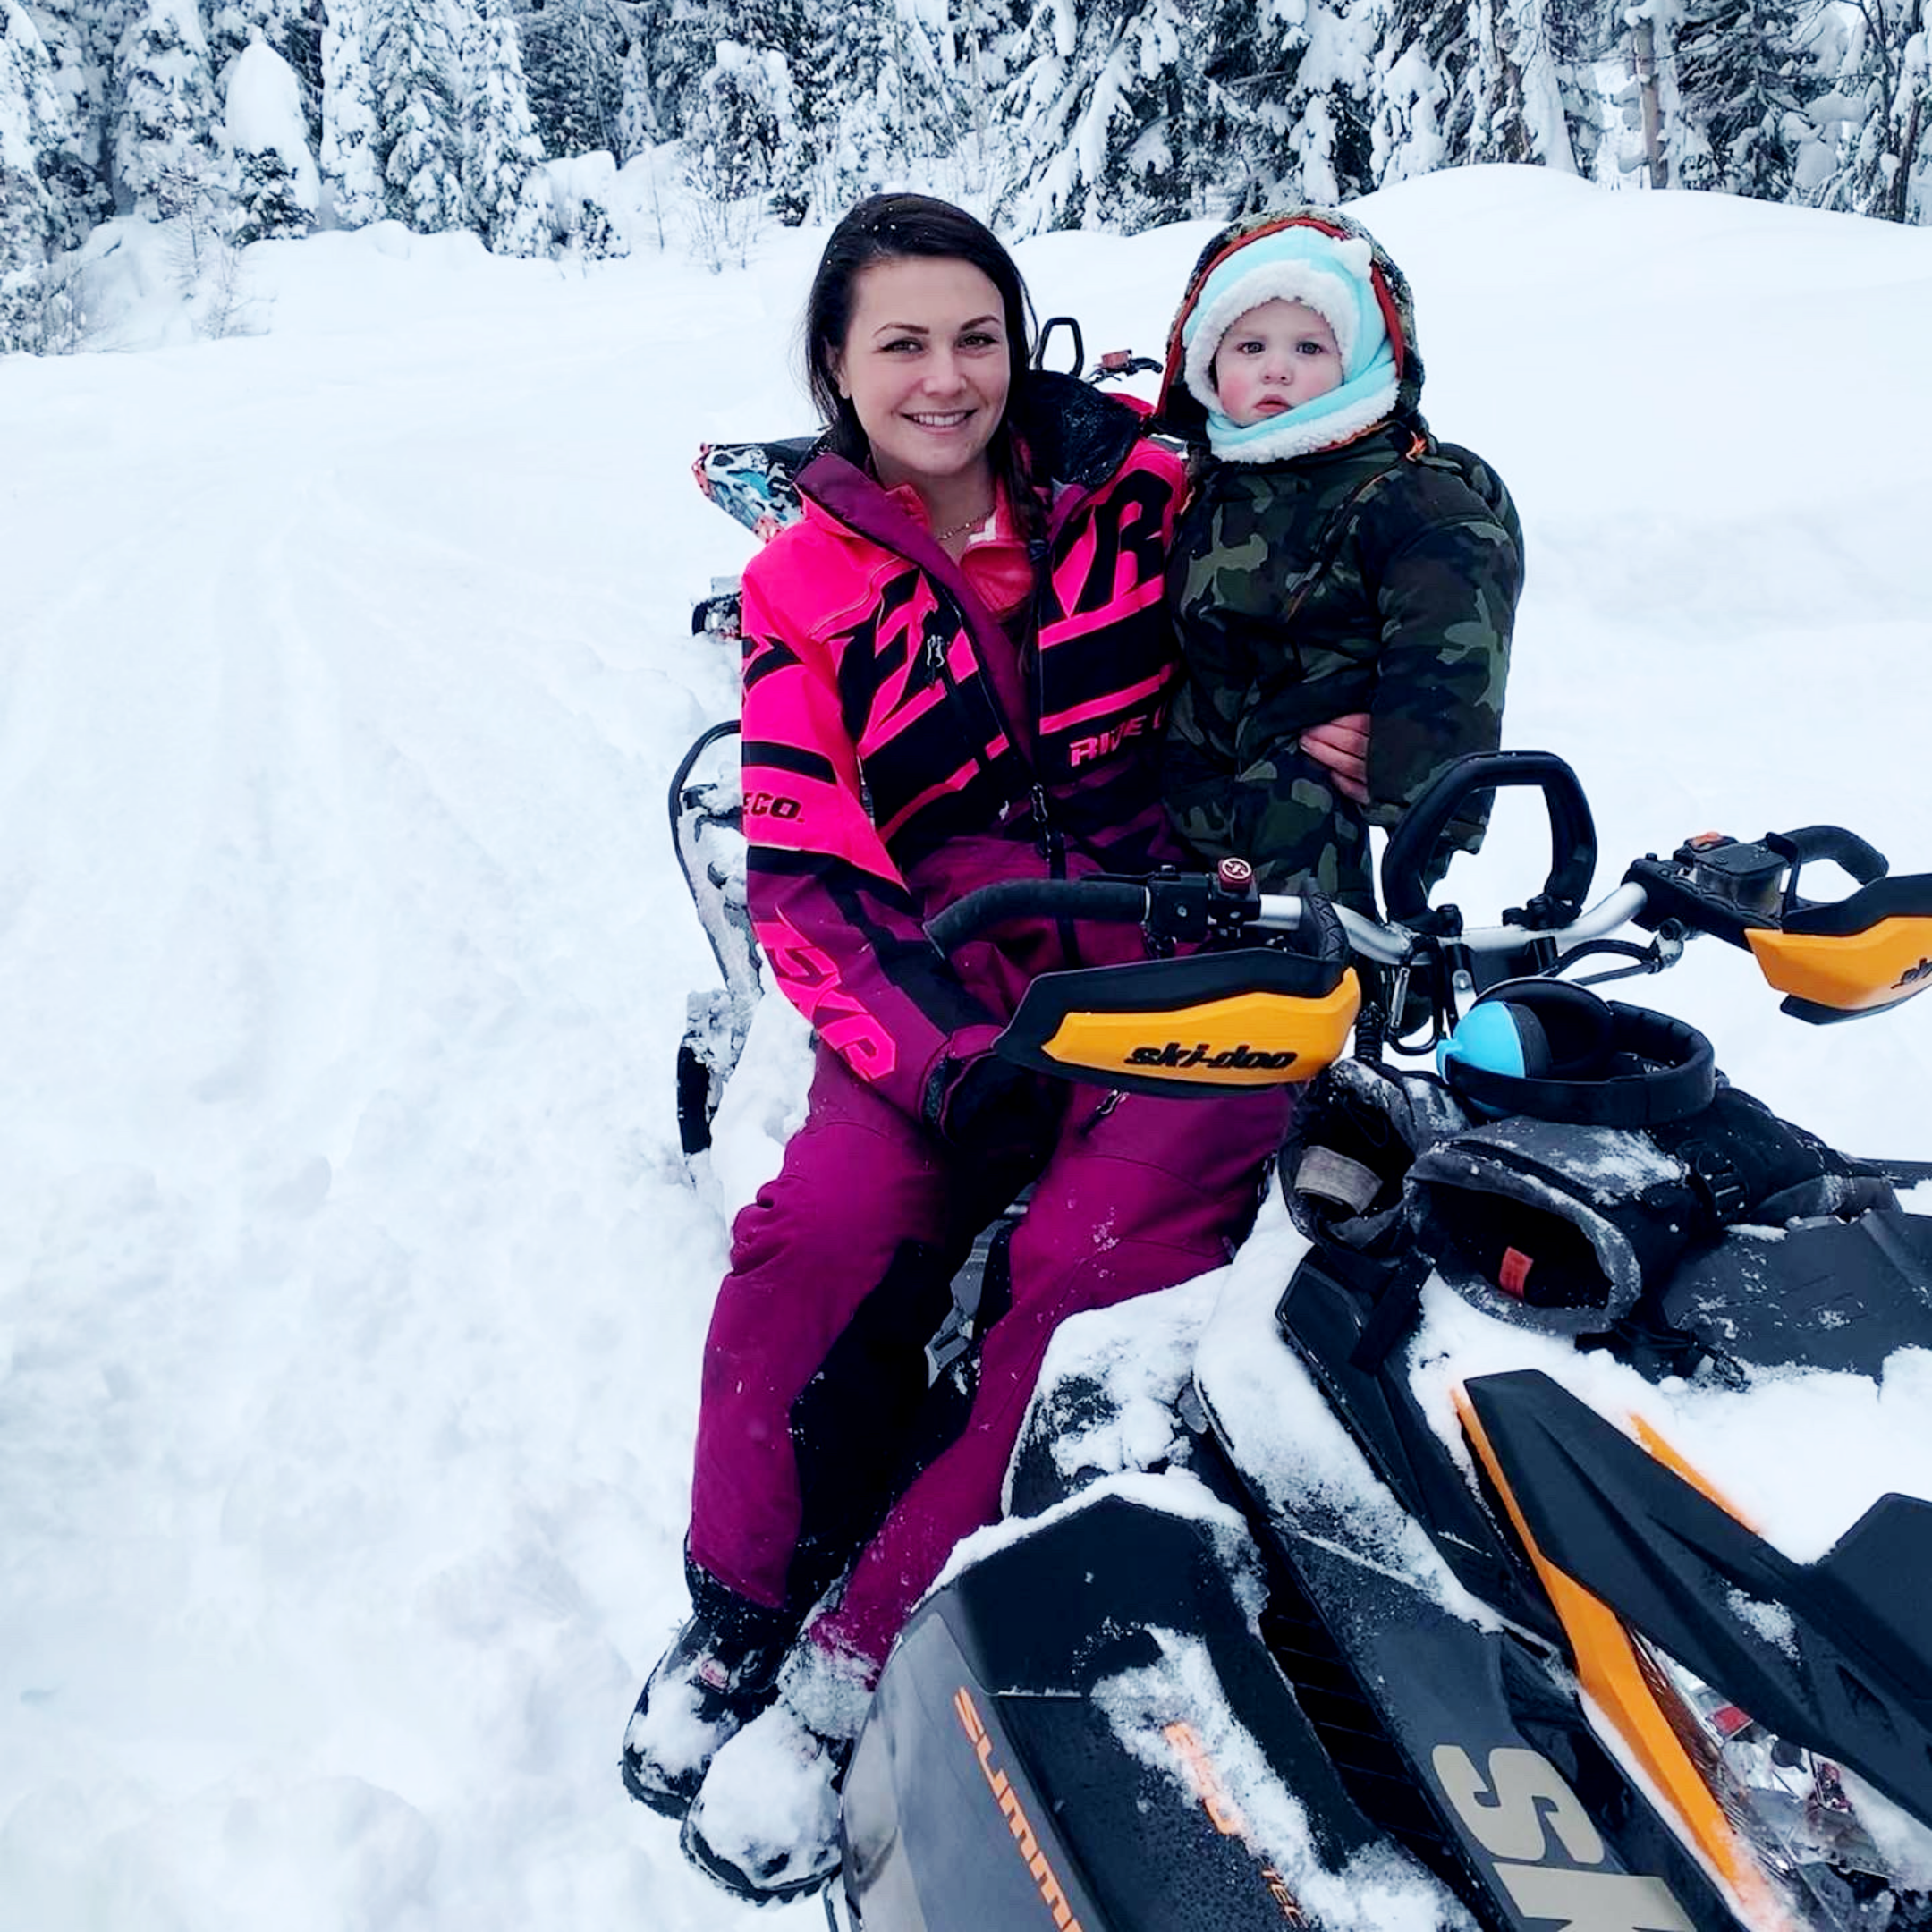 Shelby Ingram wears a pink snowsuit while sitting on a snowmobile with her one-year-old son, Mason Chomica.